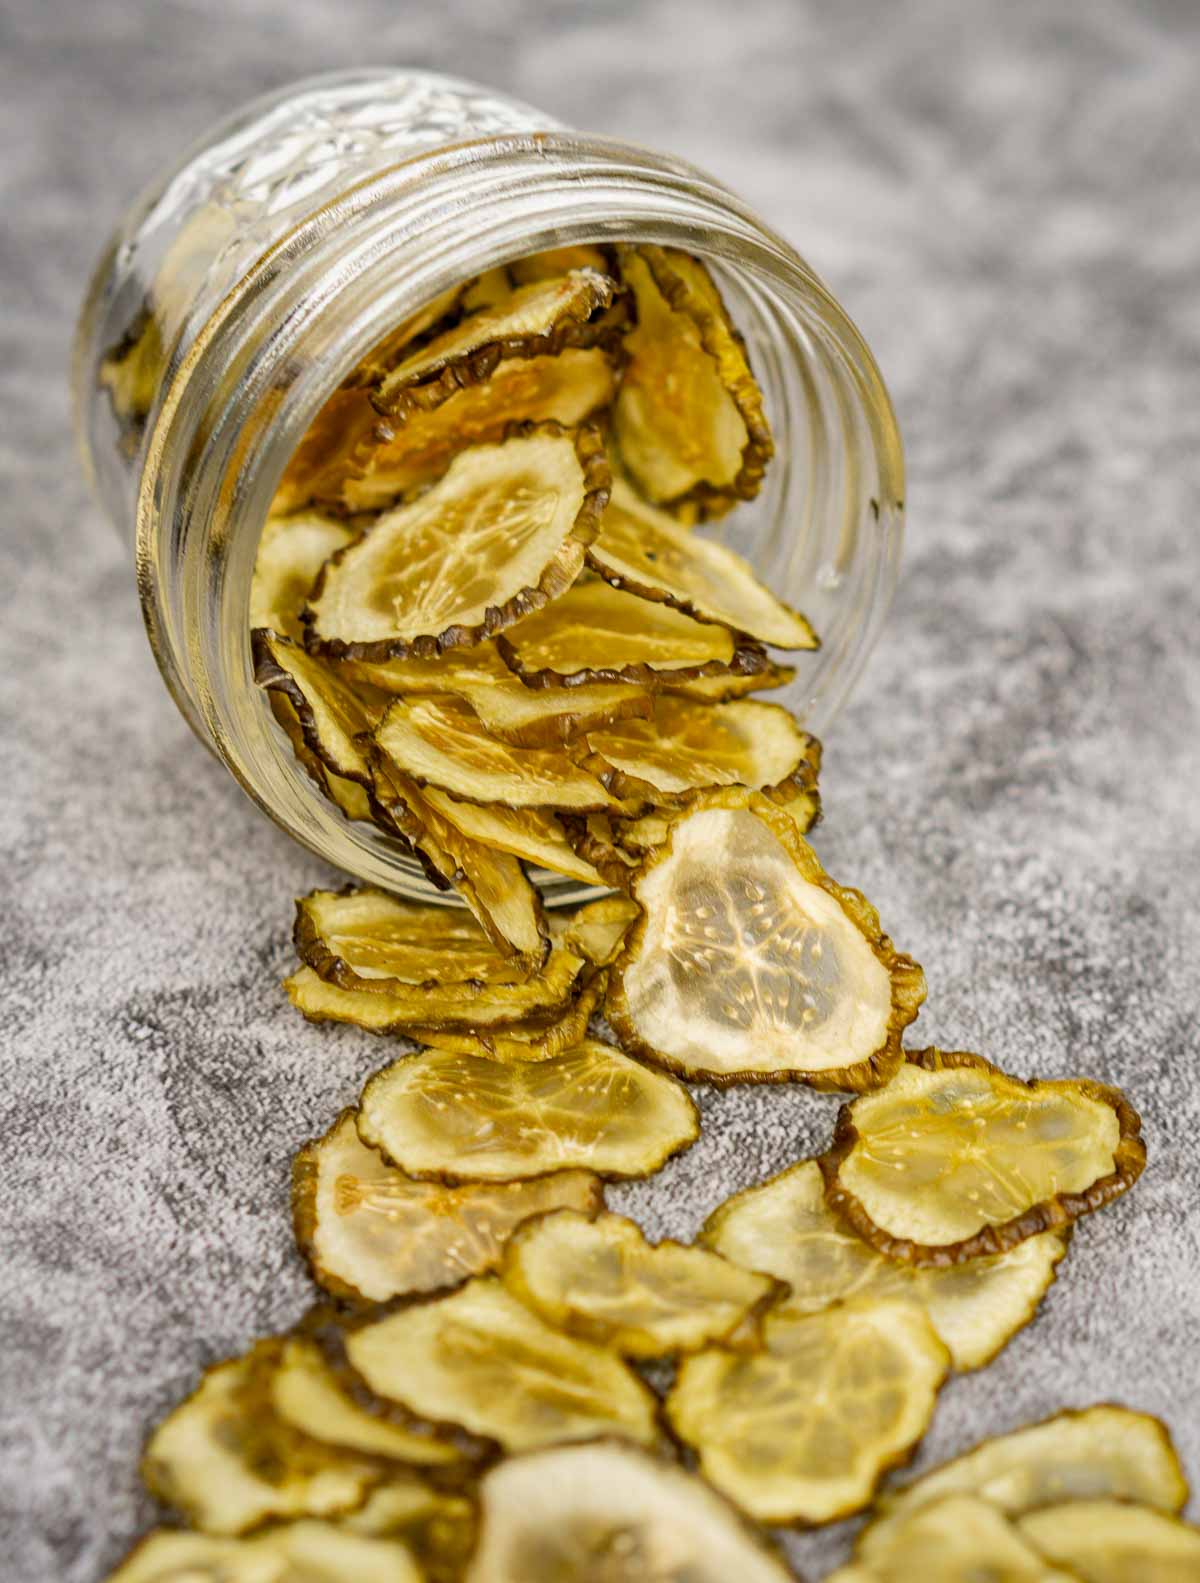 Pickle chips spilled out on the counter from their glass jar.